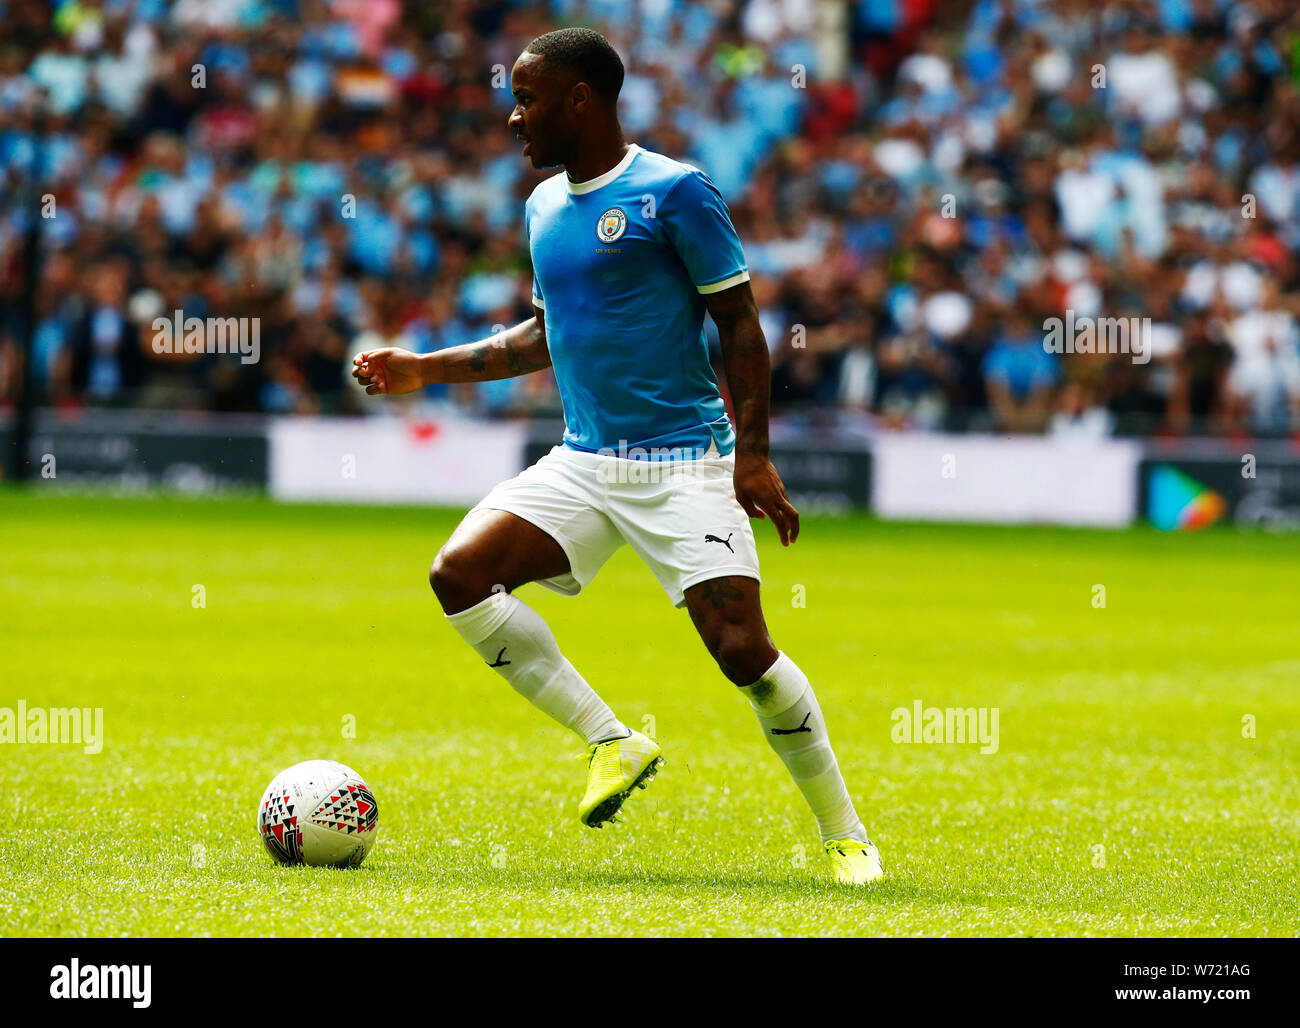 London, UK. 04th Aug, 2019. LONDON, ENGLAND. AUGUST 04: Manchester City's Raheem Sterling during The FA Community Shield between Liverpool and Manchester City at Wembley Stadium on August 04, 2019 in London, England. Credit: Action Foto Sport/Alamy Live News Stock Photo